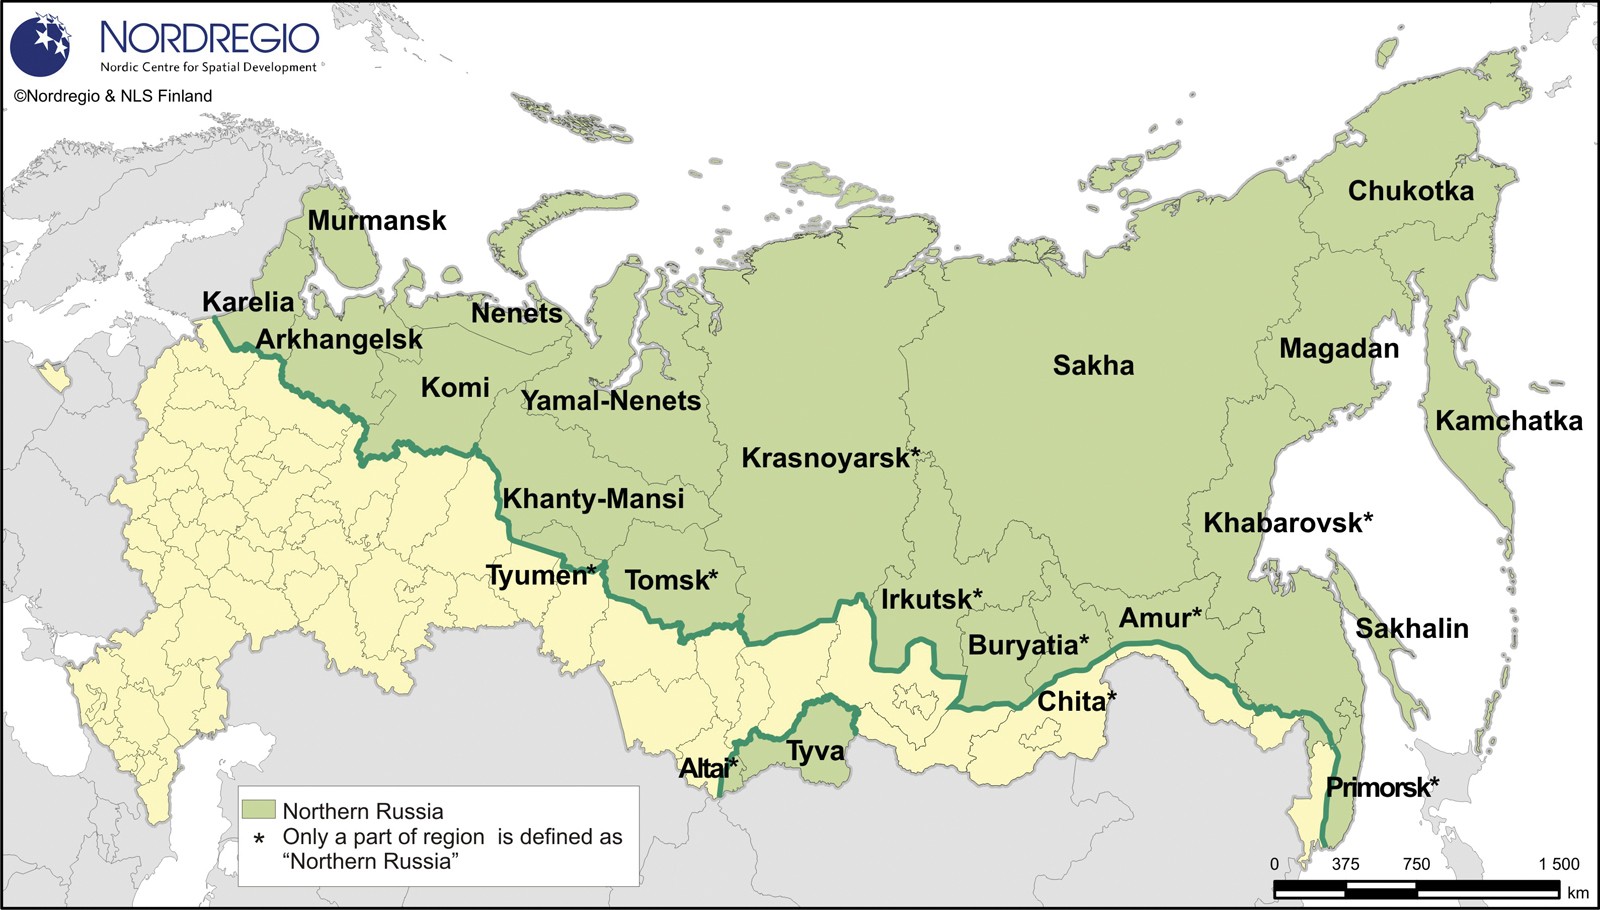 According to the current definition, 11.9 million square kilometres, or about 70% of the total territory of the Russian Federation, is defined as belonging to the North. It is important to note that the notion of the 'North' encompasses the actual 'Far North' as well as 'territories equivalent to the regions of the ‘Far North'. This emphasis on equivalency make it possible to define as 'northern' some climatically disadvantaged territories in Southern Siberia, even though they are not geographically contiguous with the rest of the North. The present boundaries of the Russian North are demarcated by a heavy green line in the map. 